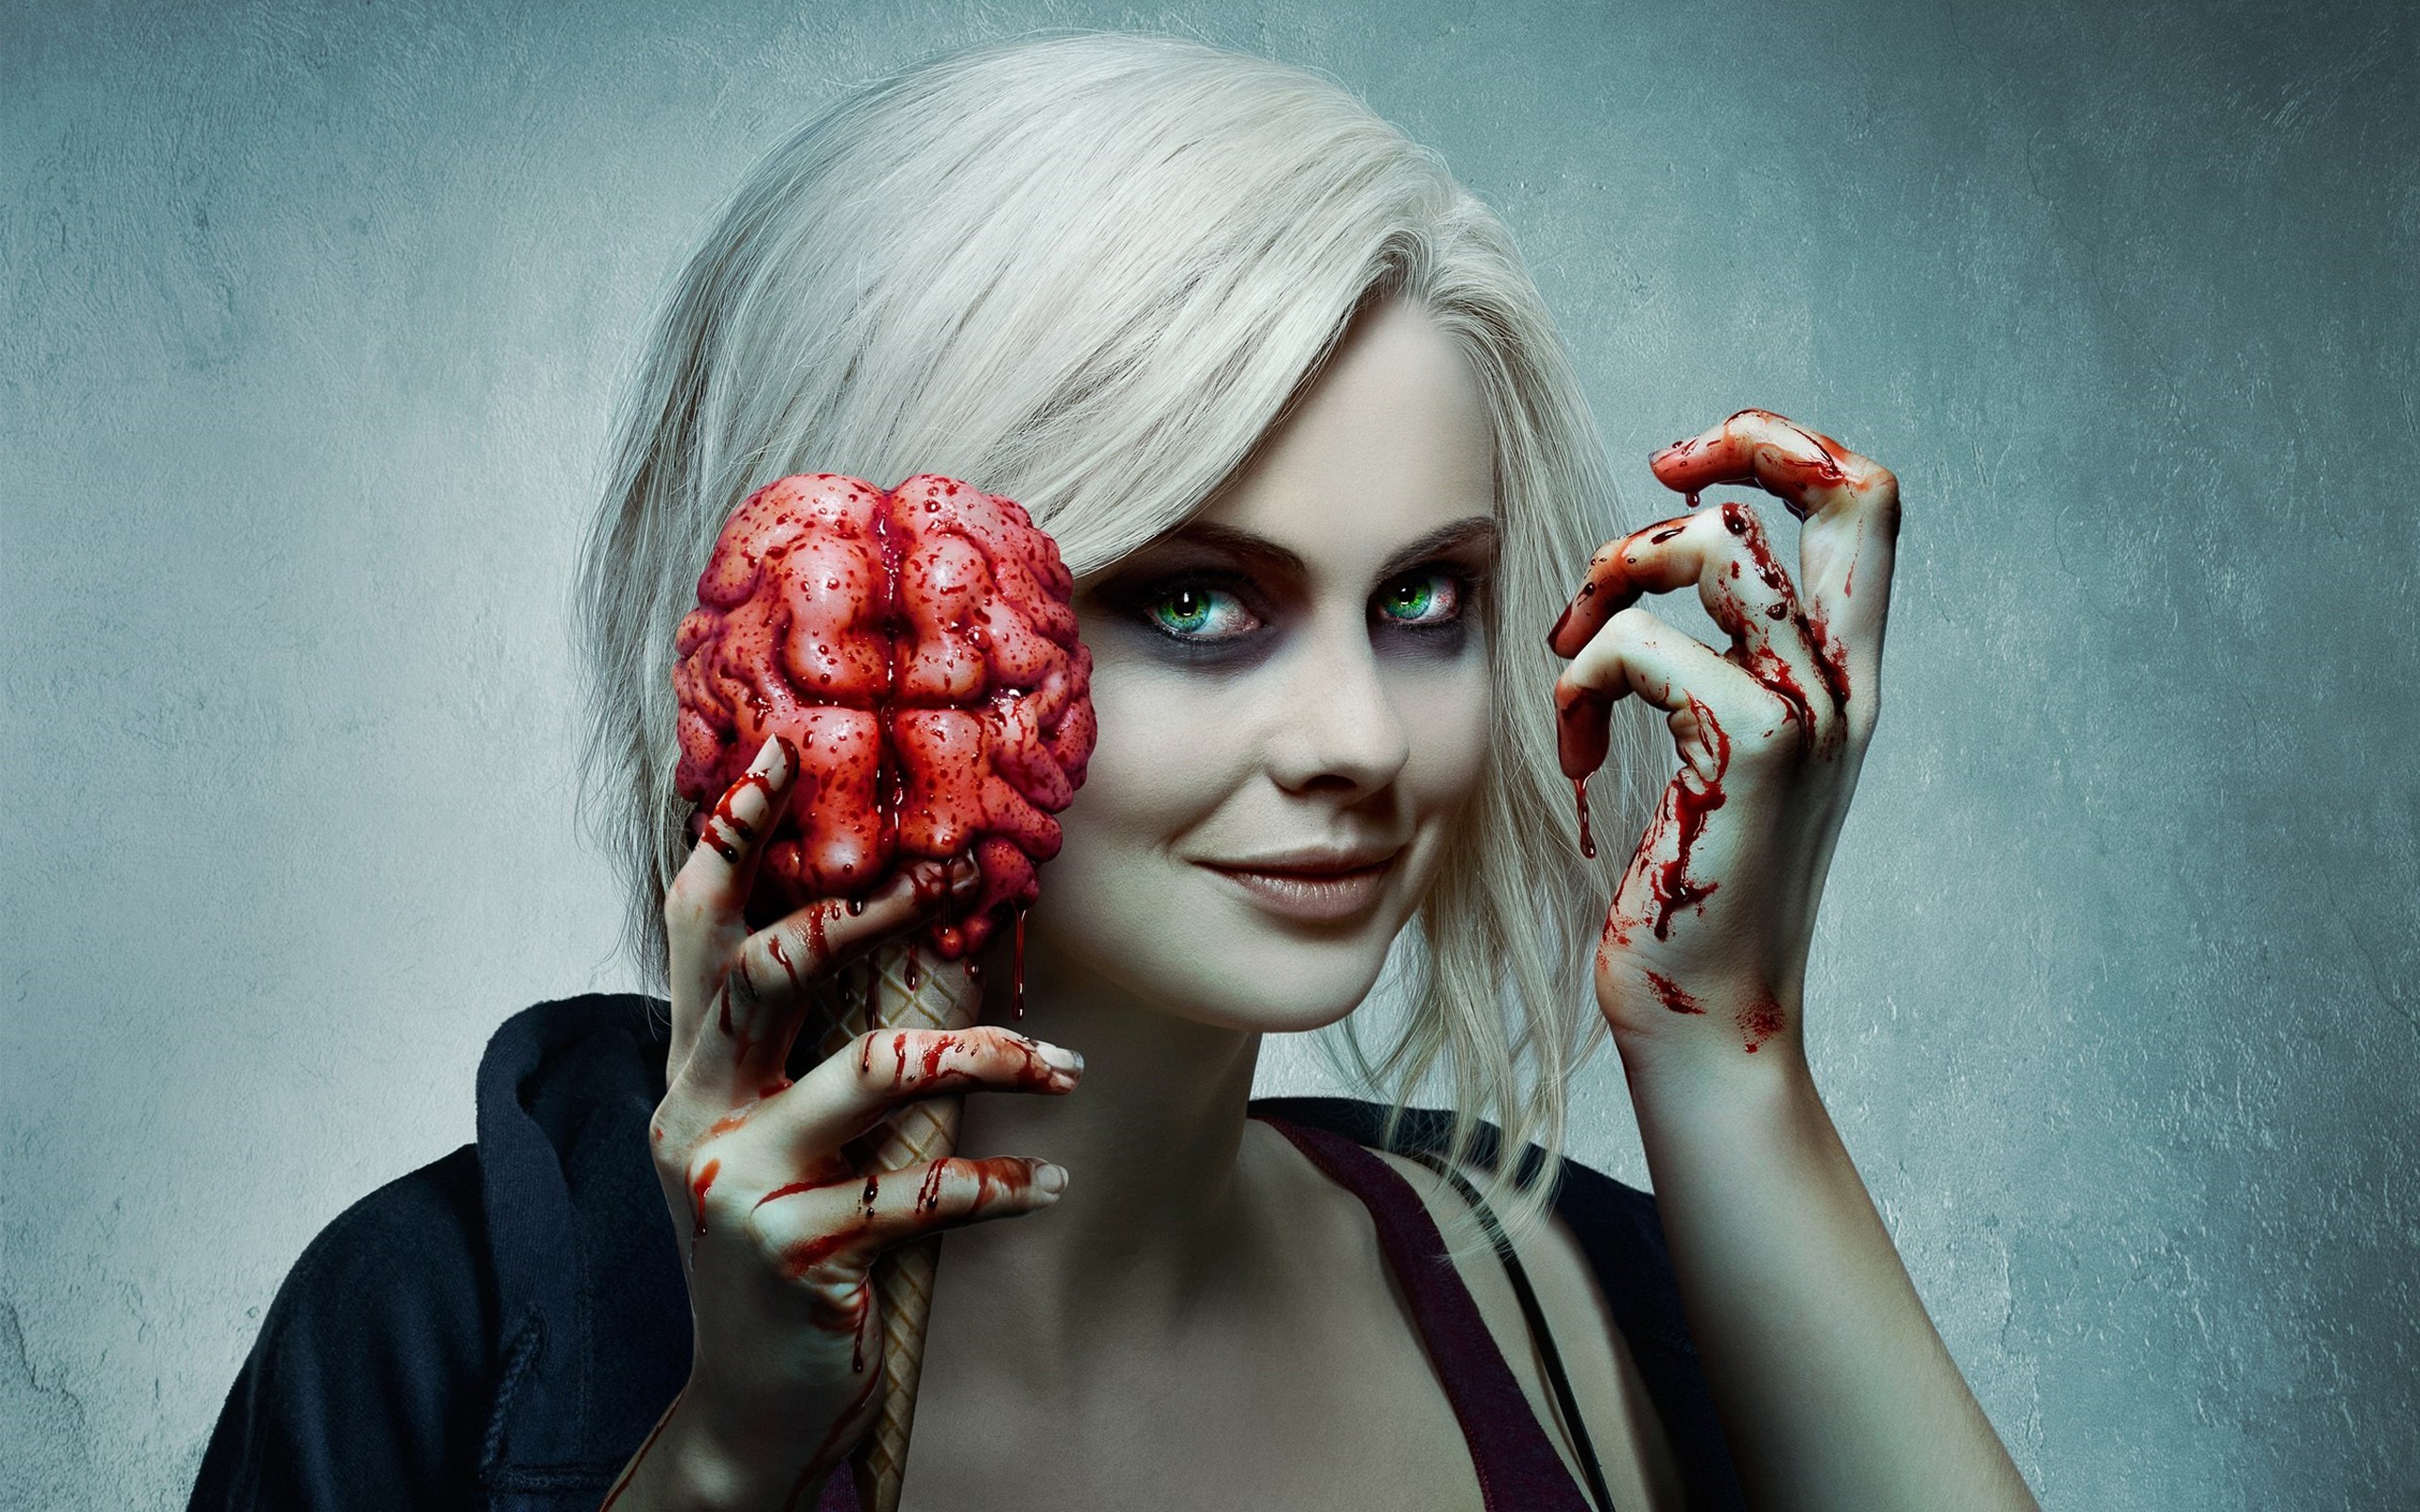 People 2560x1600 Rose McIver horror green eyes New Zealand Women iZombie (tv show) TV series brain zombies undead blood gore looking at viewer white hair promotional women